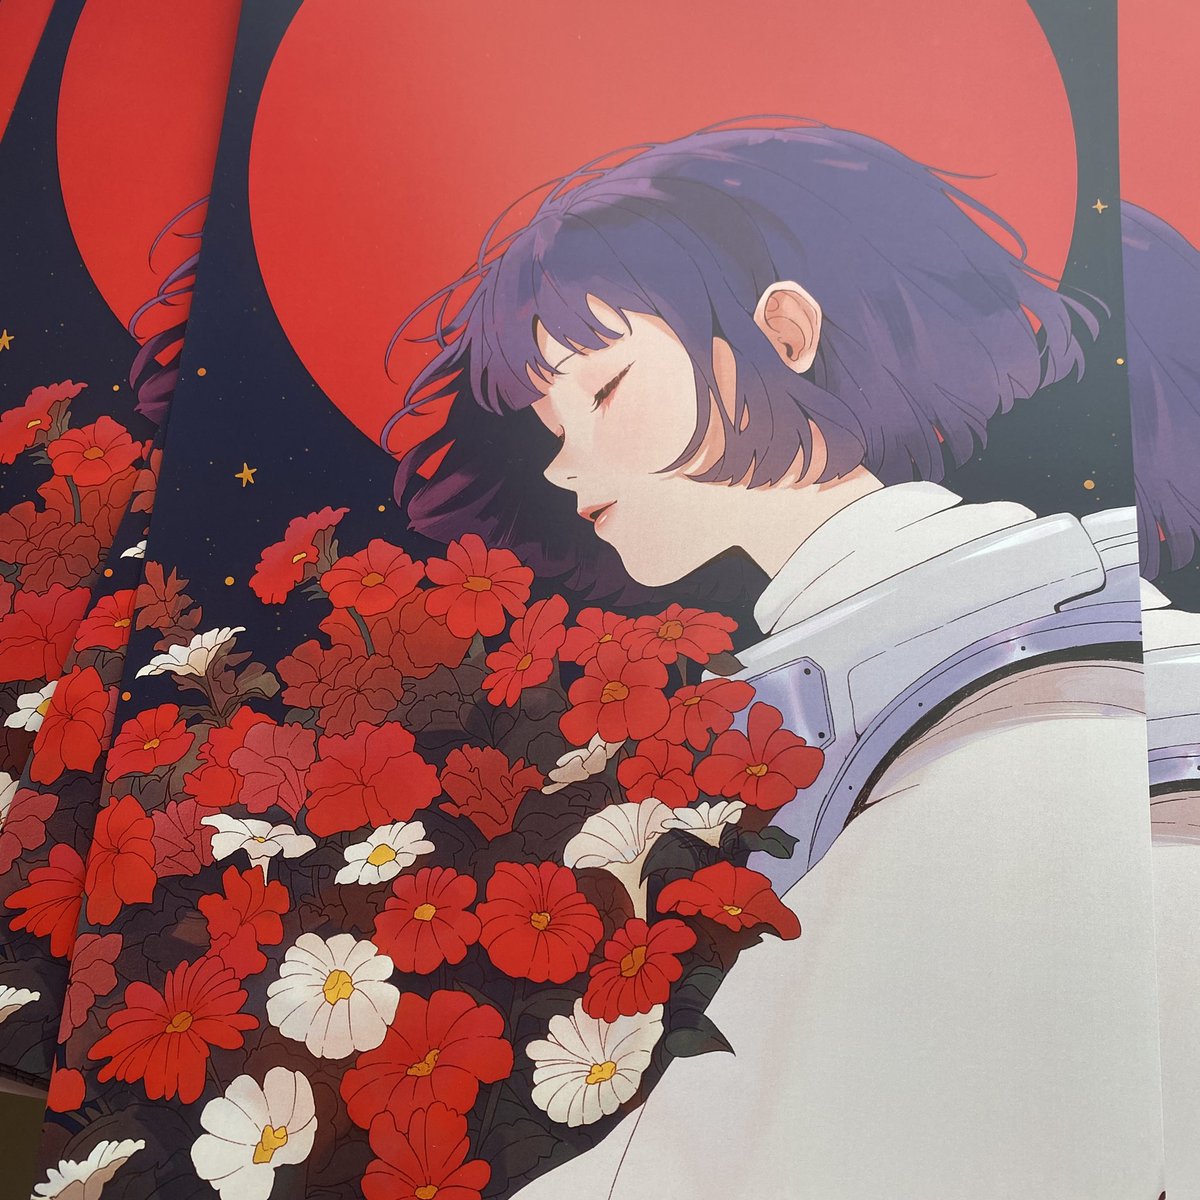 「bloom is up on my store now as a print 」|rinsのイラスト